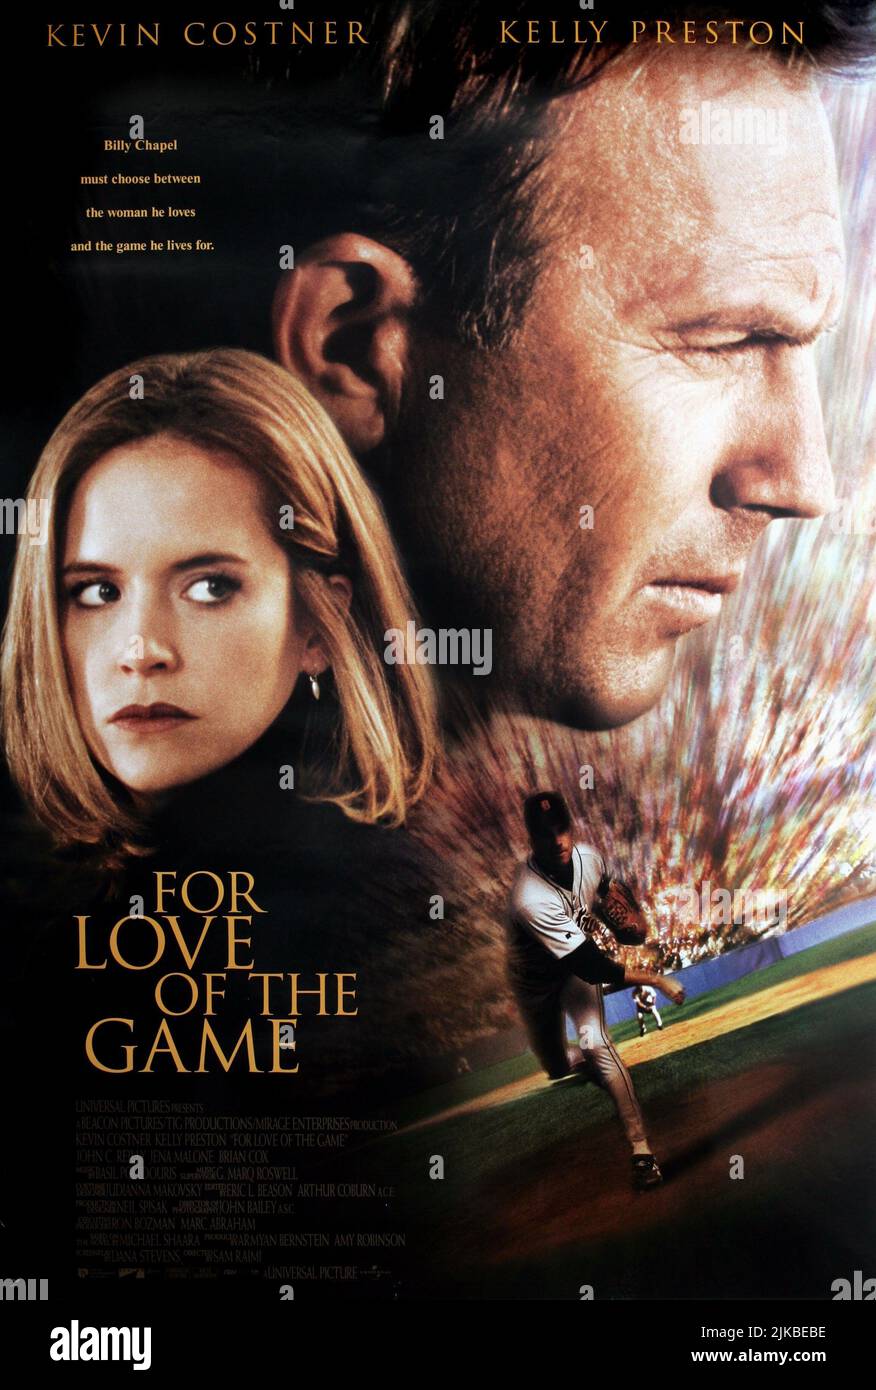 https://c8.alamy.com/comp/2JKBEBE/kelly-preston-kevin-costner-poster-film-for-love-of-the-game-usa-1999-characters-jane-aubrey-director-sam-raimi-15-september-1999-warning-this-photograph-is-for-editorial-use-only-and-is-the-copyright-of-universal-pictures-andor-the-photographer-assigned-by-the-film-or-production-company-and-can-only-be-reproduced-by-publications-in-conjunction-with-the-promotion-of-the-above-film-a-mandatory-credit-to-universal-pictures-is-required-the-photographer-should-also-be-credited-when-known-no-commercial-use-can-be-granted-without-written-authority-from-the-film-company-2JKBEBE.jpg